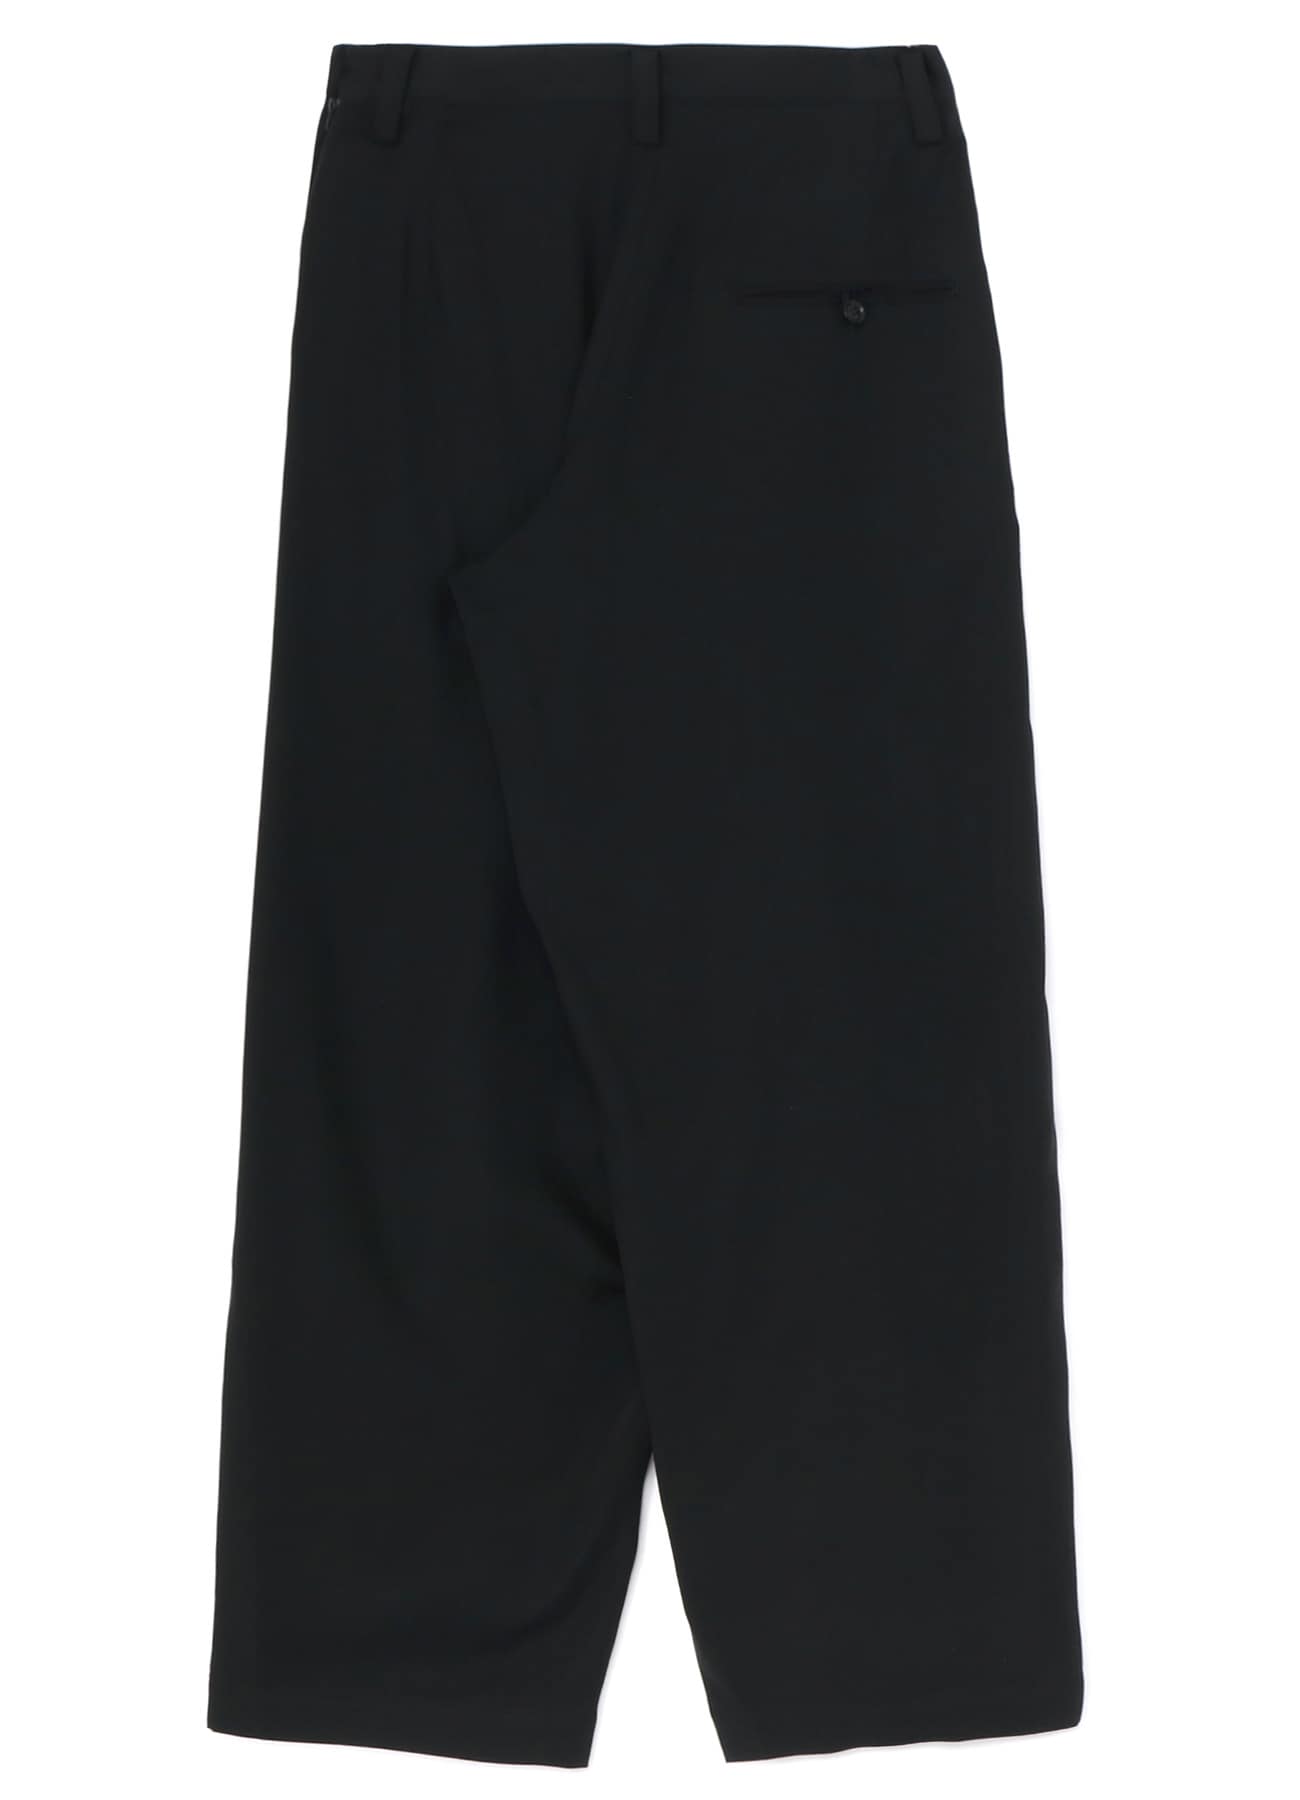 CUPRO DUNGAREE TWILL SIDE OPEN PANTS(XS Black): Y's｜THE SHOP 